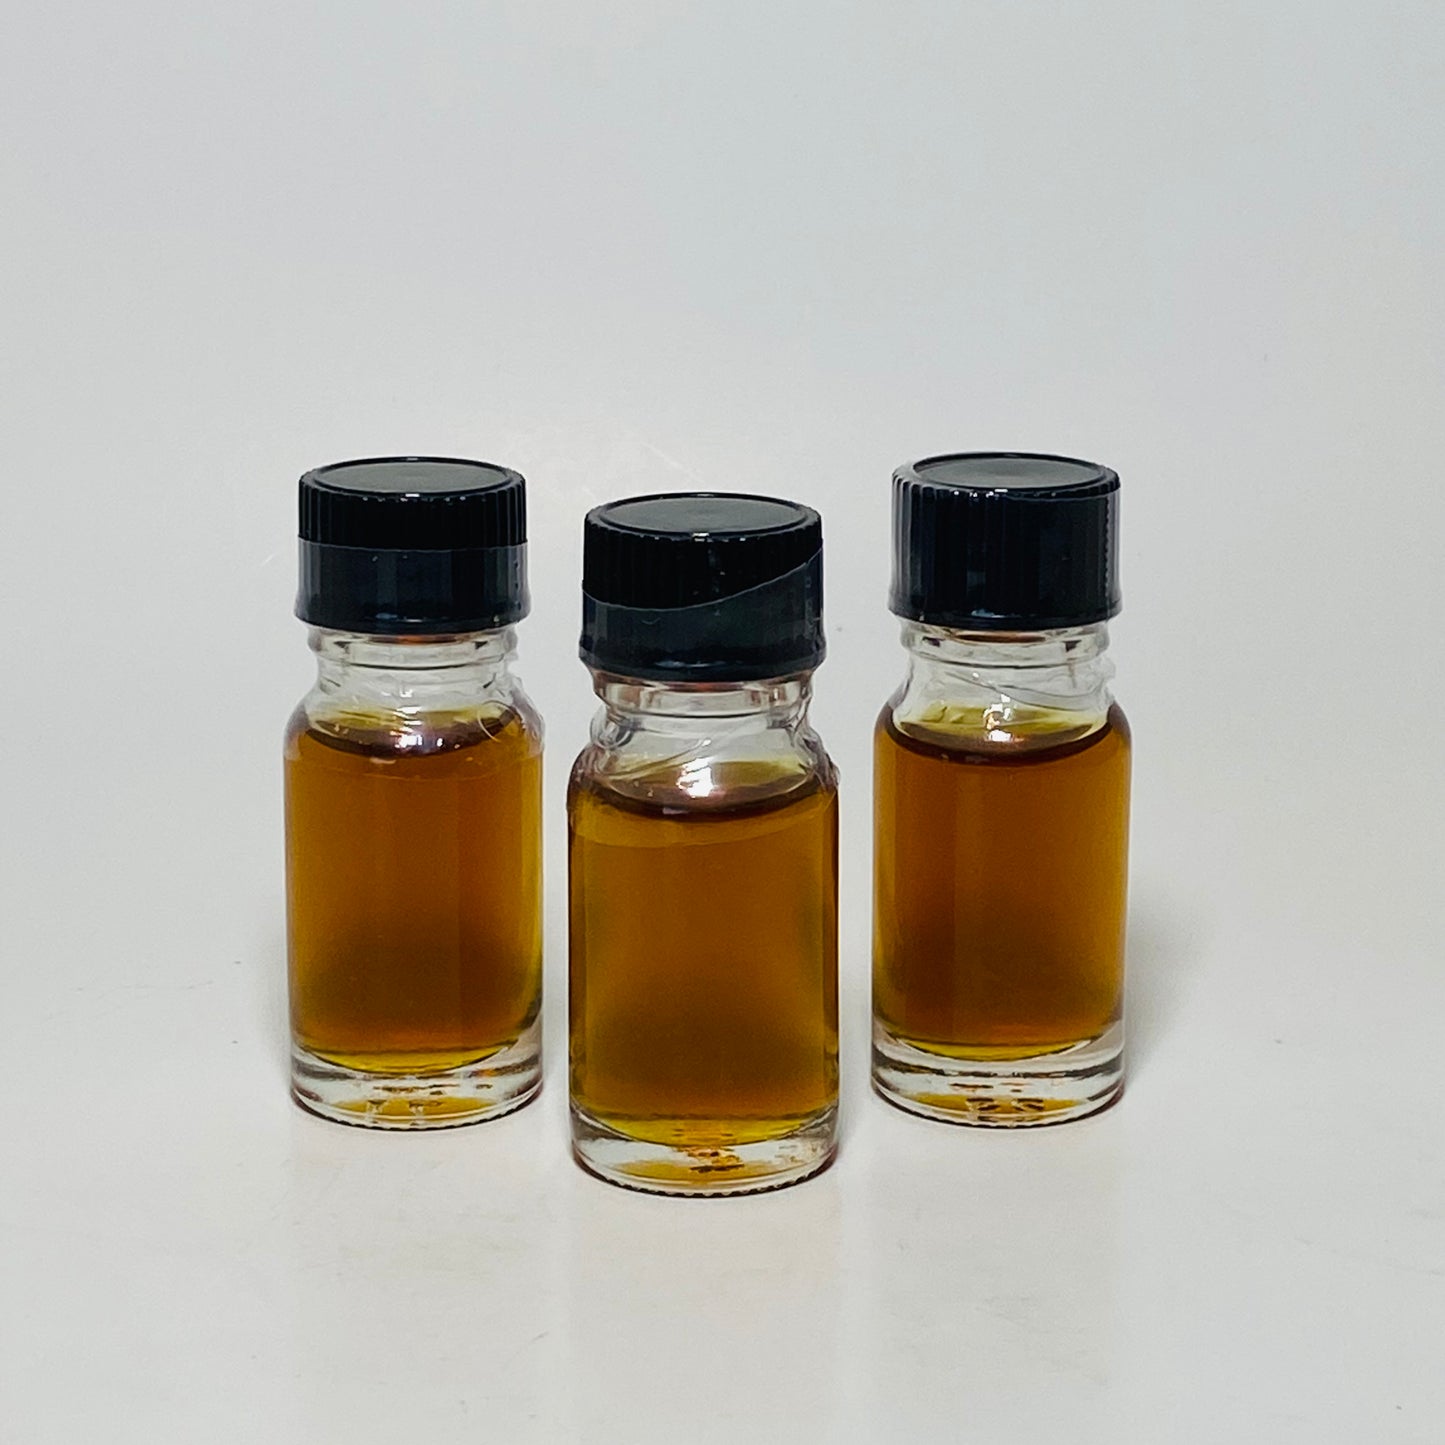 Extract Vial